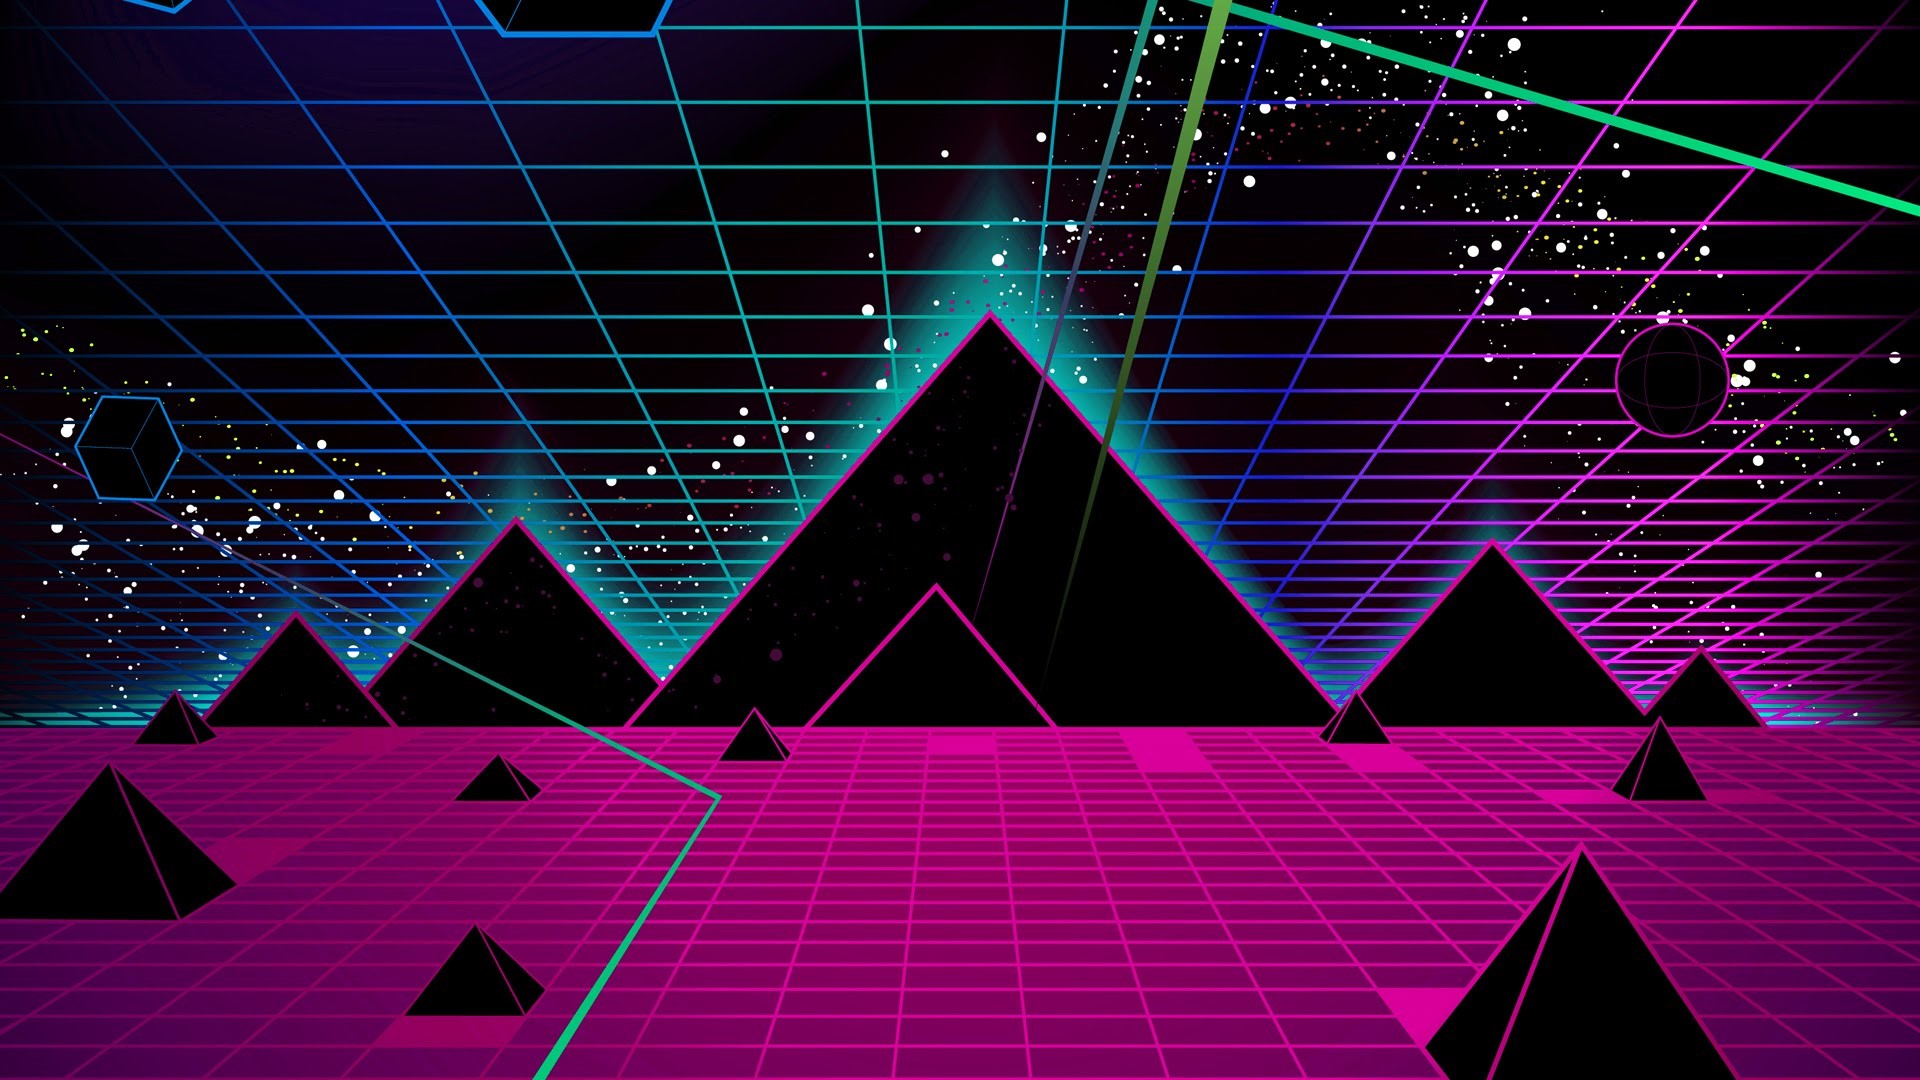 [Translate to English:] Tron Inspired Simulated Reality